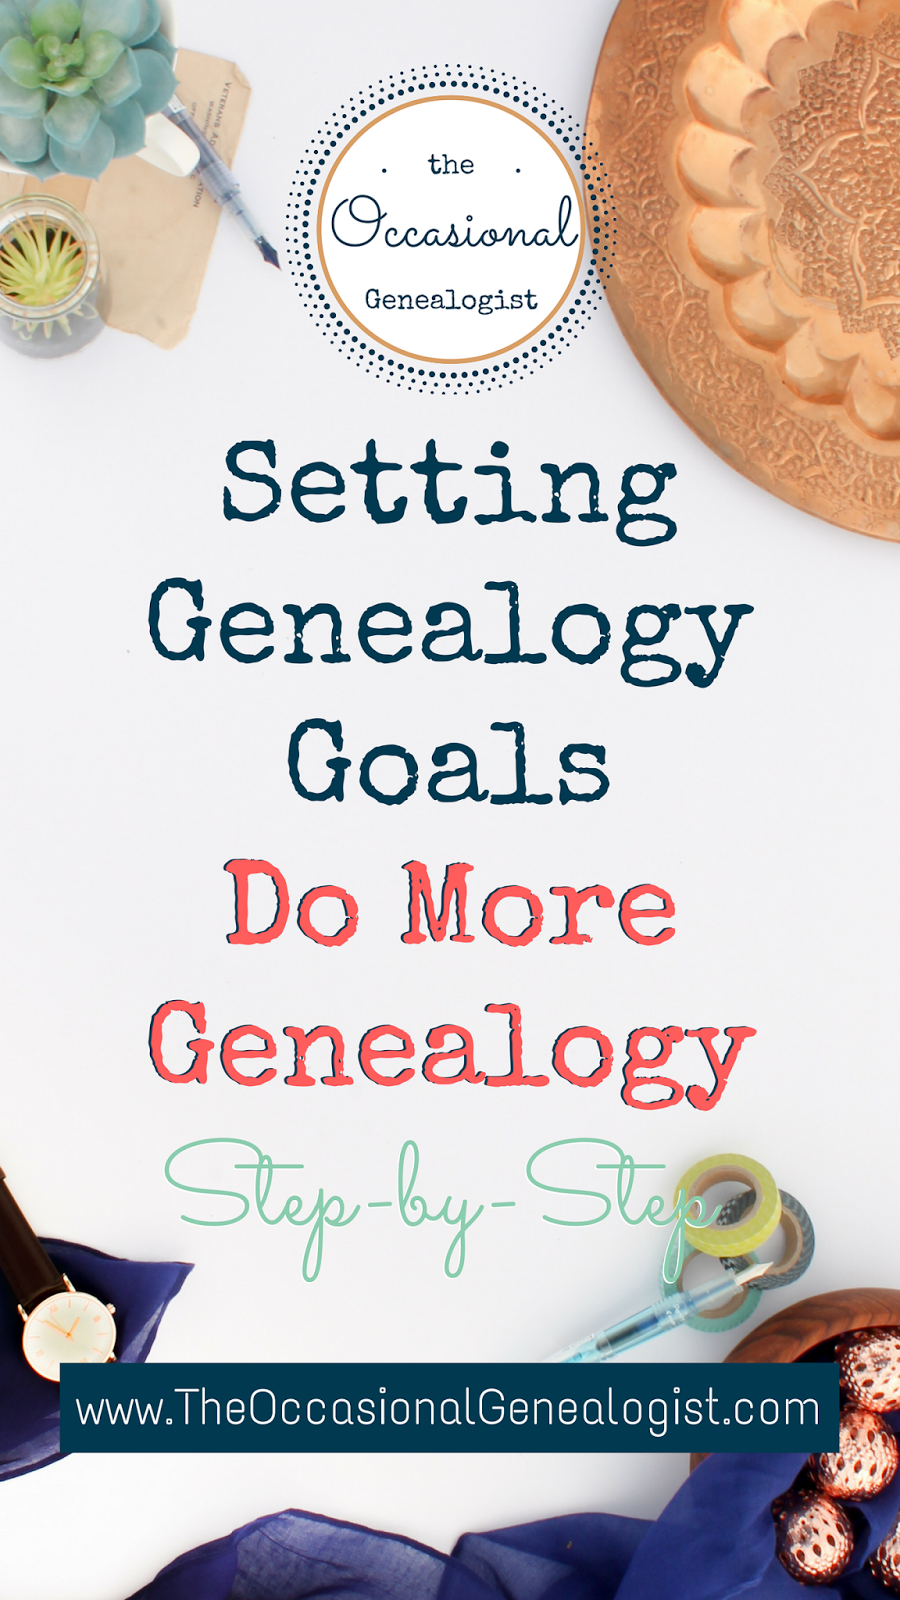 Five easy steps will help you identify and set genealogy goals for your research. | The Occasional Genealogist #genealogy #familyhistory #genealogygoals #researchplanning